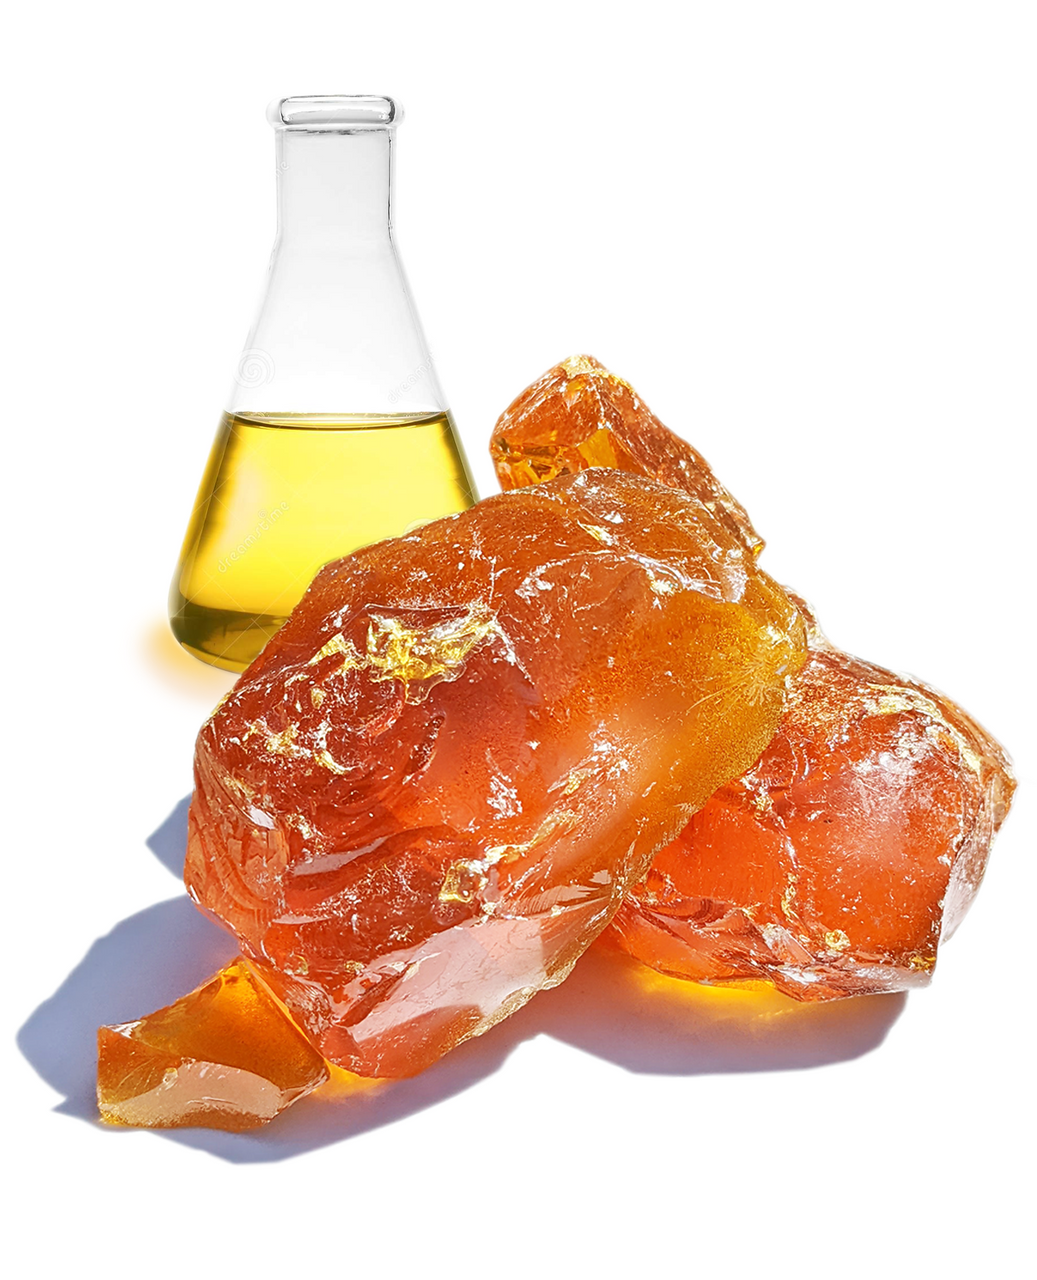 Maleic Resin is a resin derived from rosin, modified with maleic anhydride, and partially esterified with glycerin.